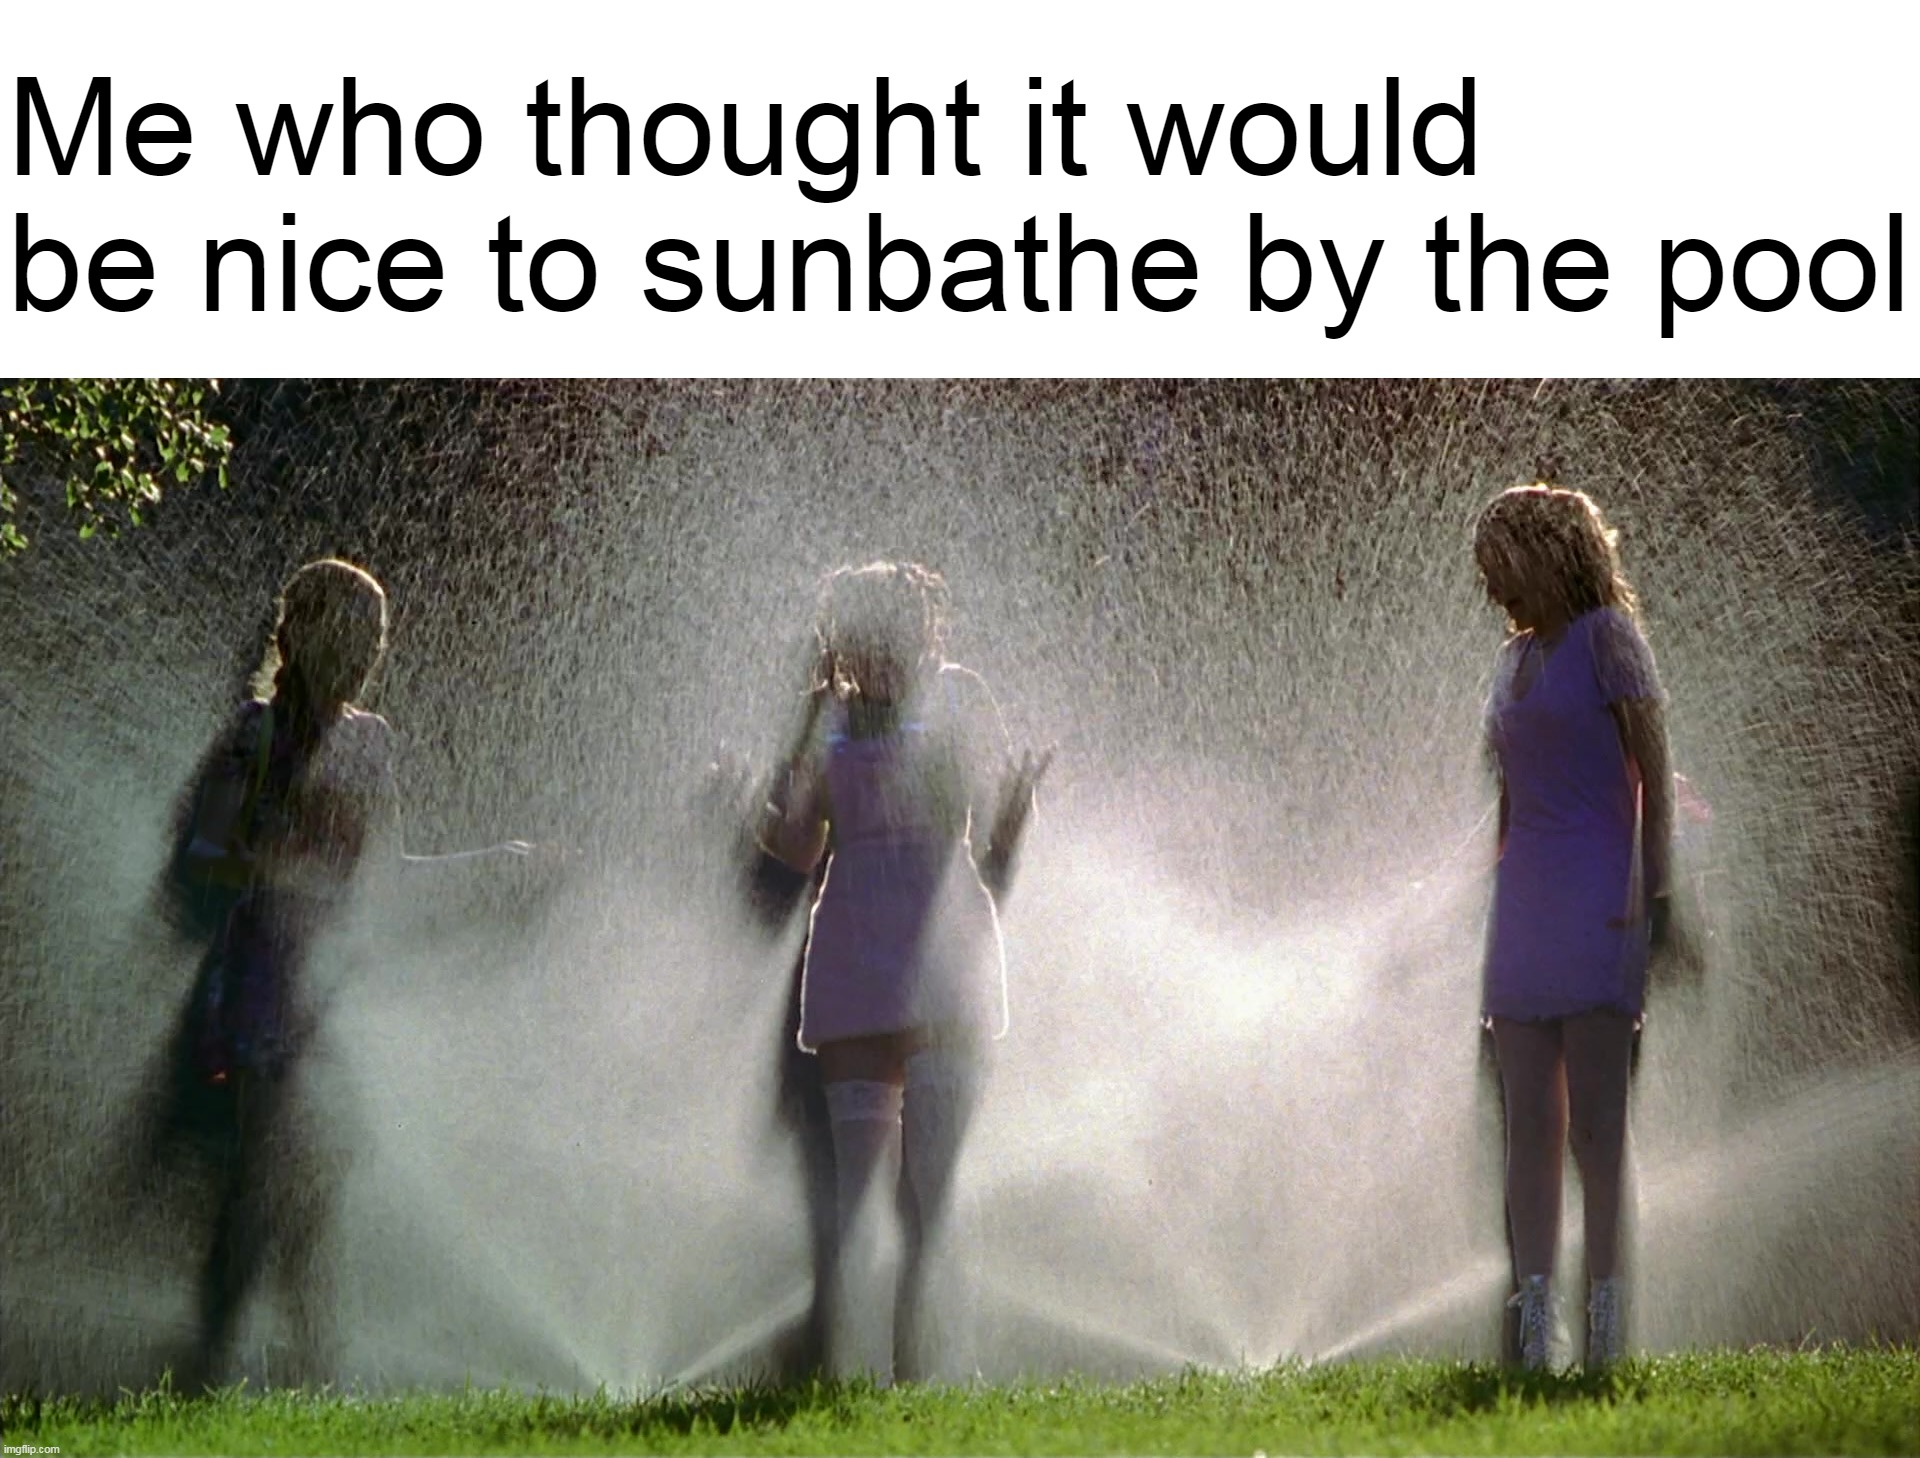 Me who thought it would be nice to sunbathe by the pool | image tagged in meme,memes,humor,relatable | made w/ Imgflip meme maker